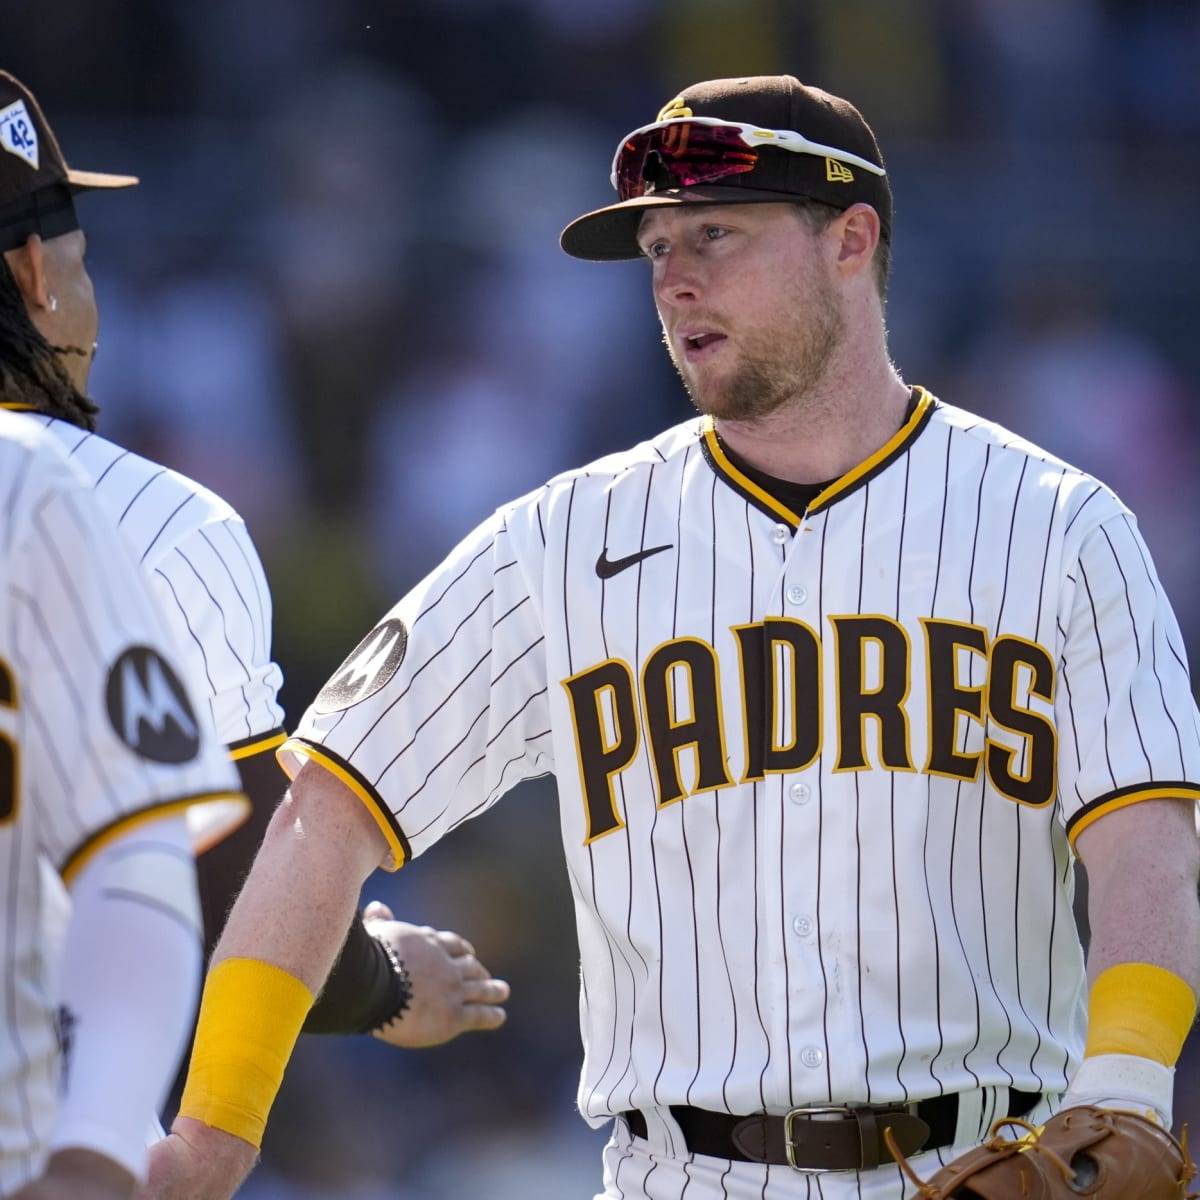 Brown has been part of the Padres' history since expansion, by FriarWire